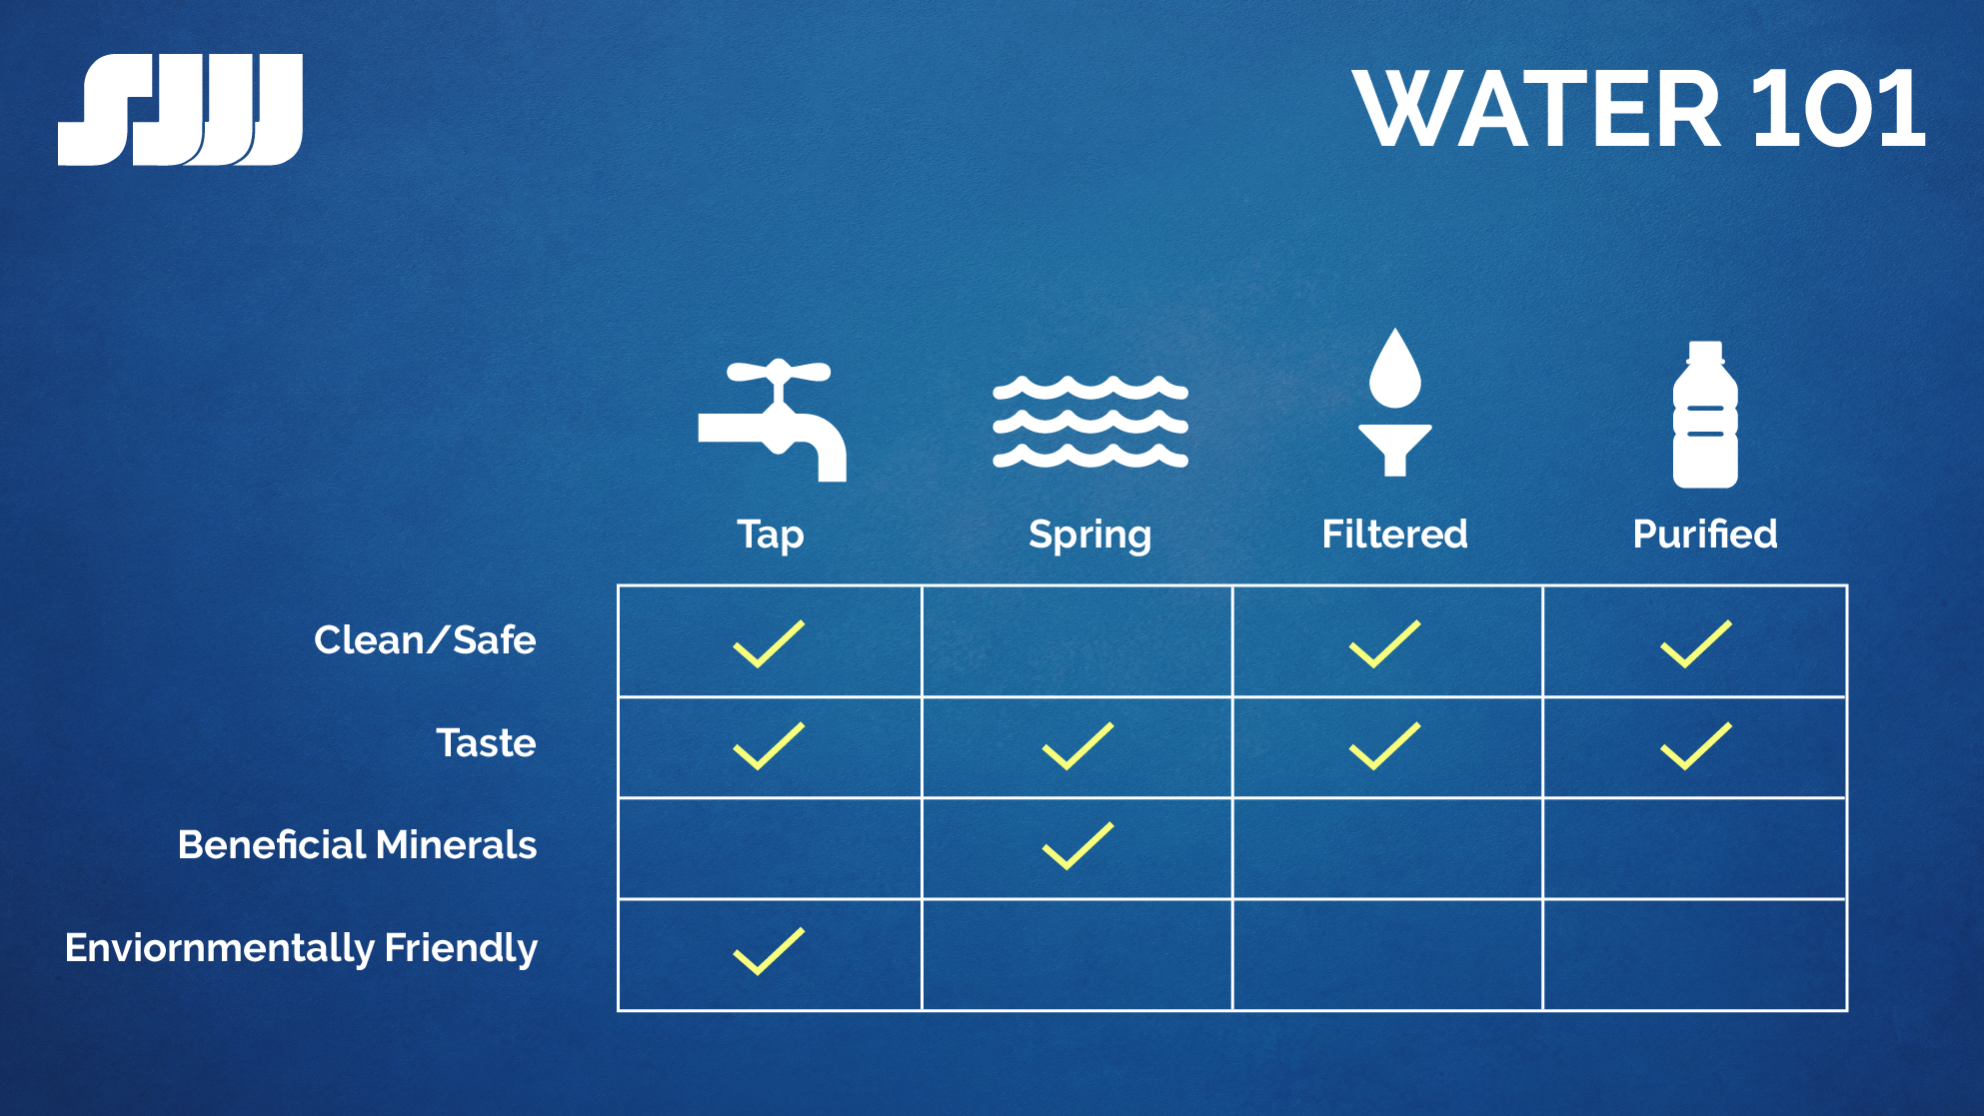 Graphic breaking down water types, safety, mineral content and impact on the environment